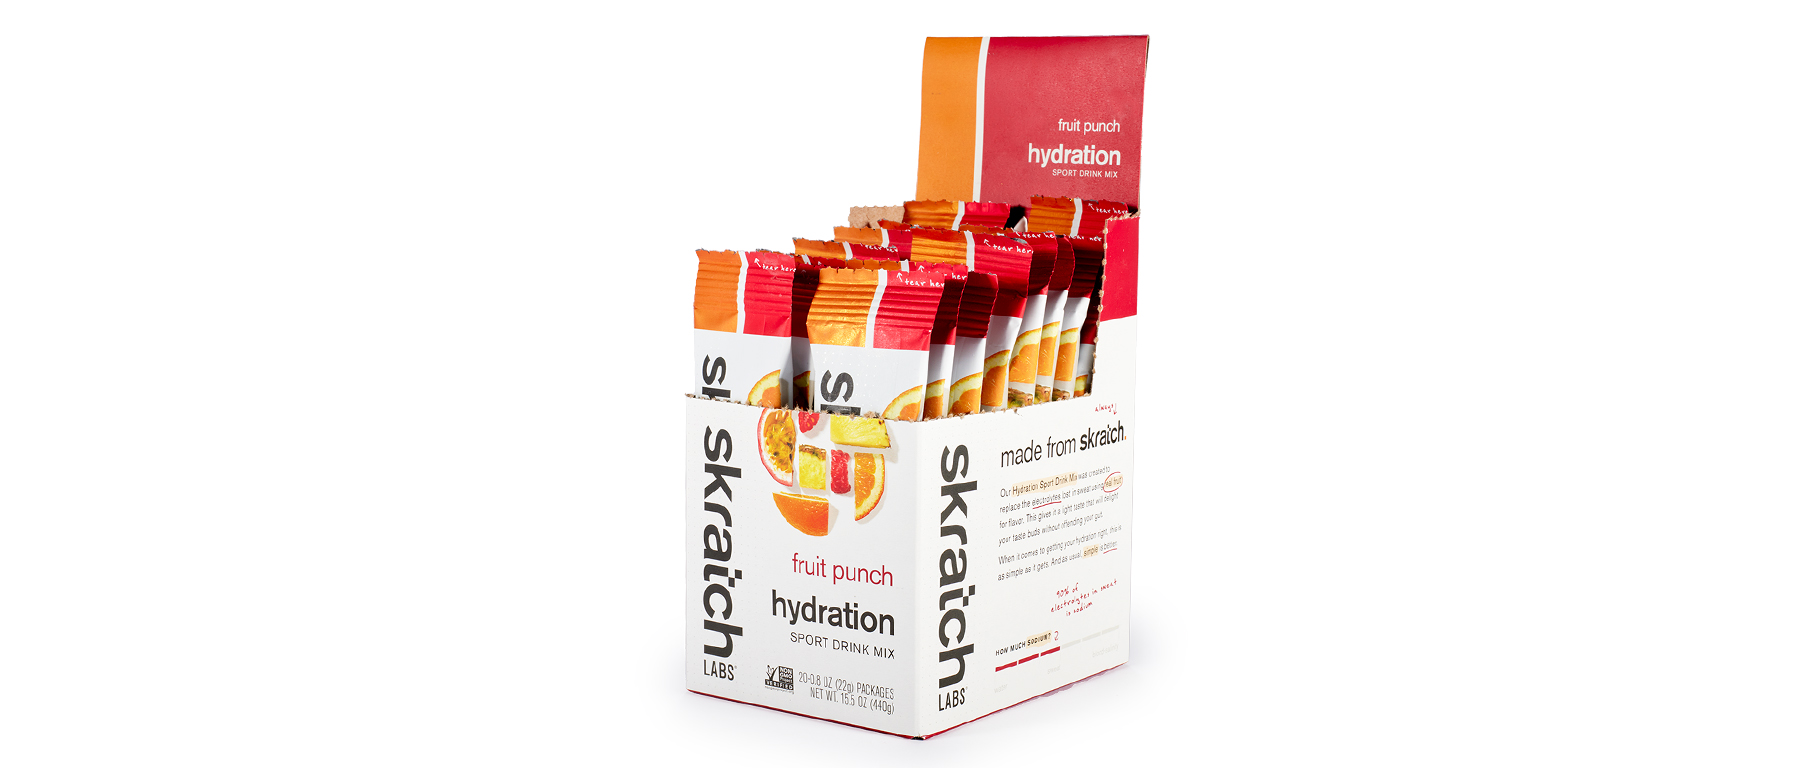 Skratch Labs Hydration Sport Drink Mix 20-Pack